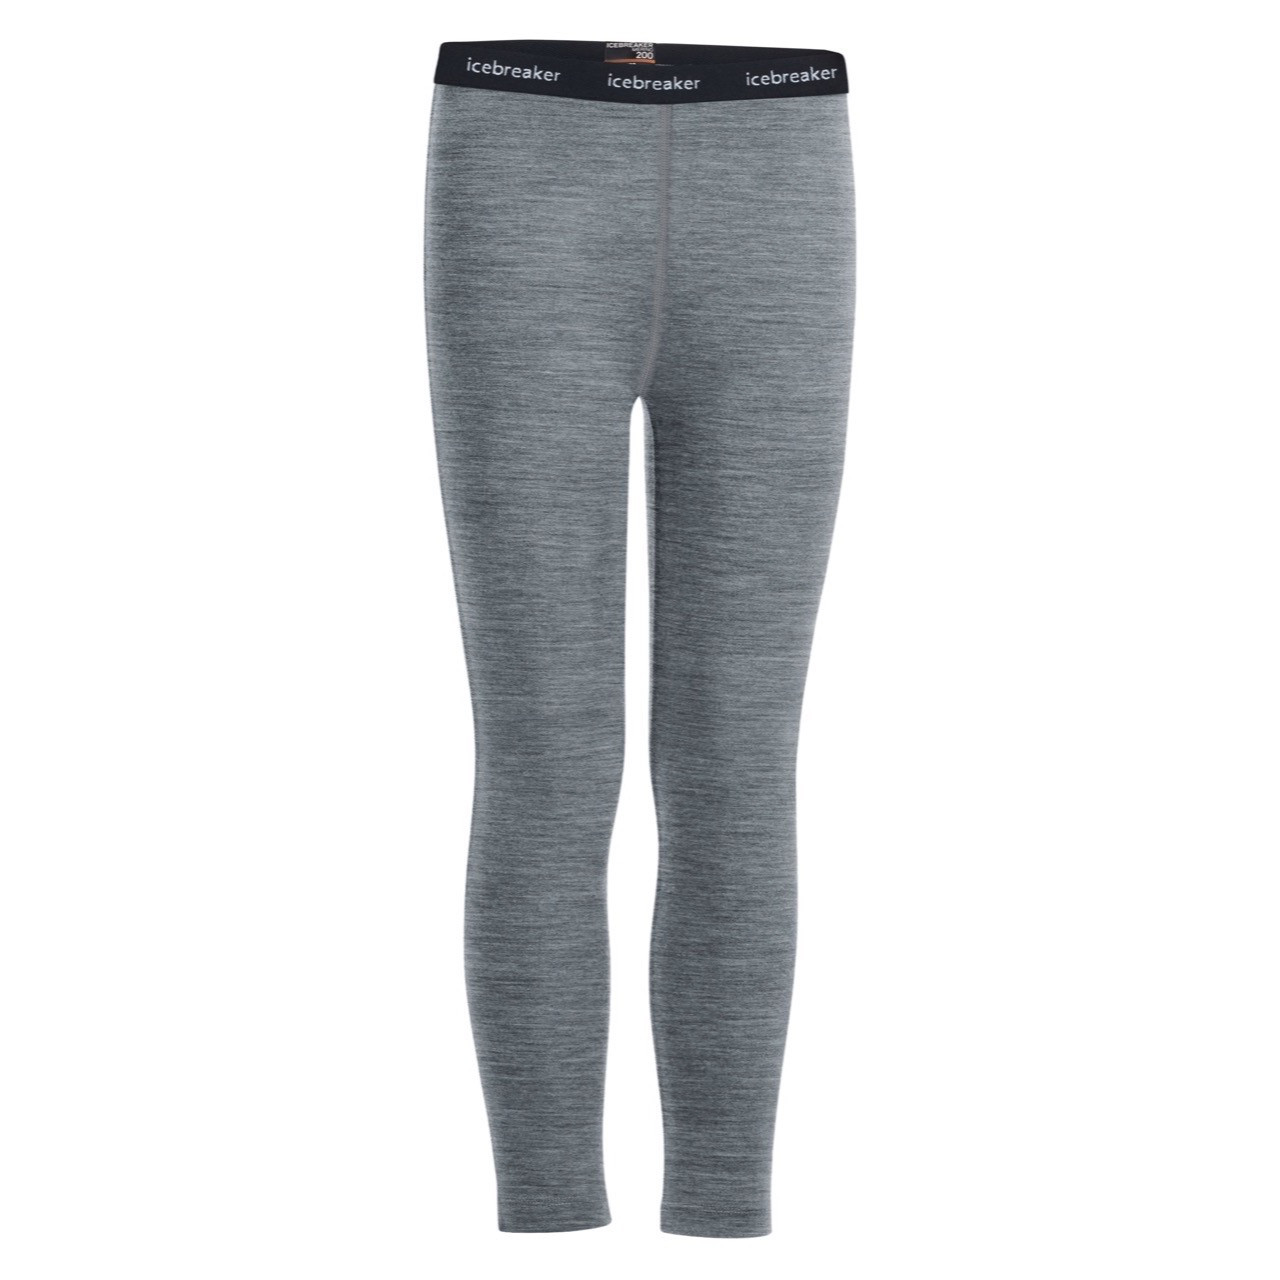 Infant Thermo Thermal Leggings in Grey Marle/white